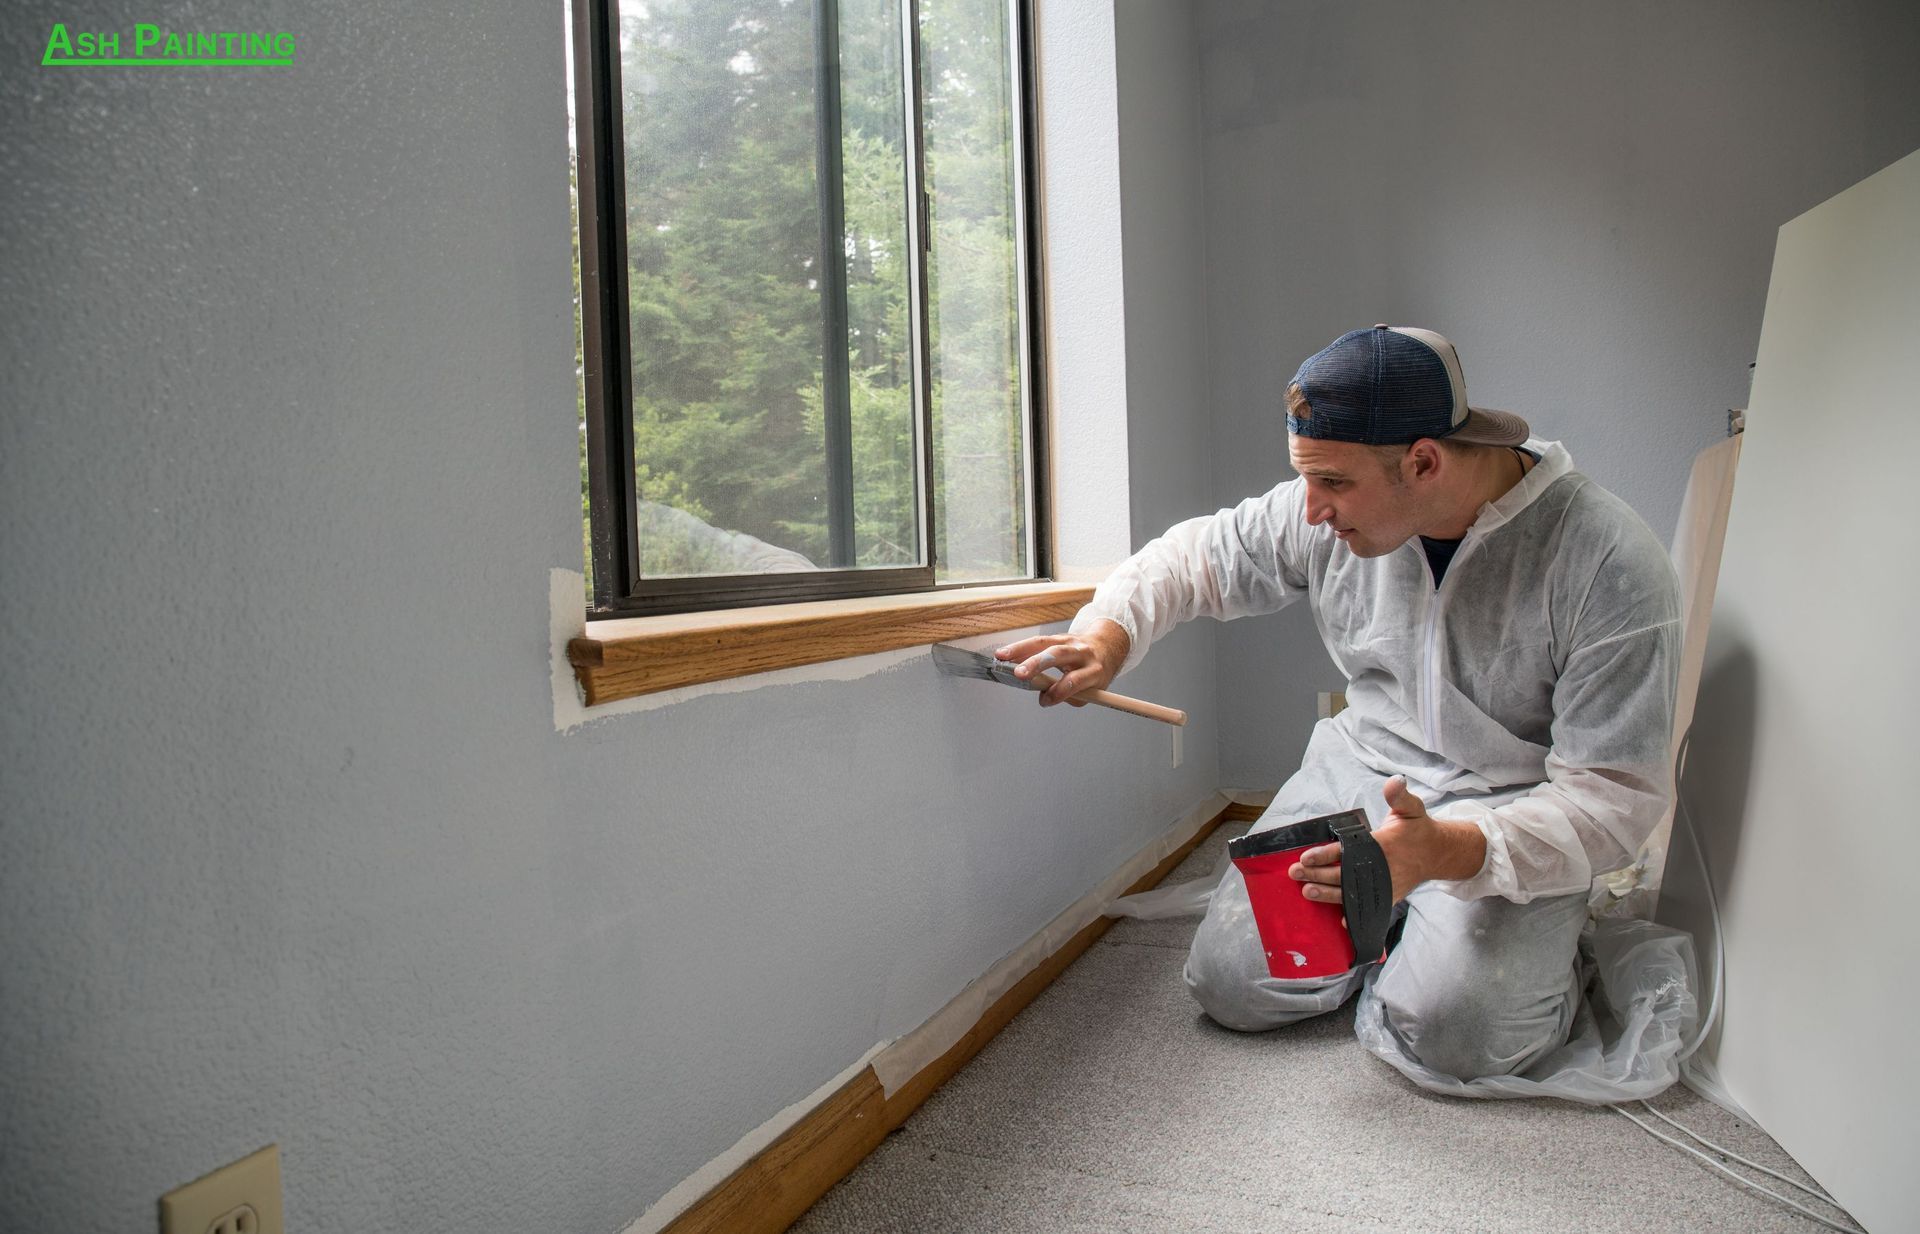 Commercial Painting Services in Oregon with Commercial Painting Estimates